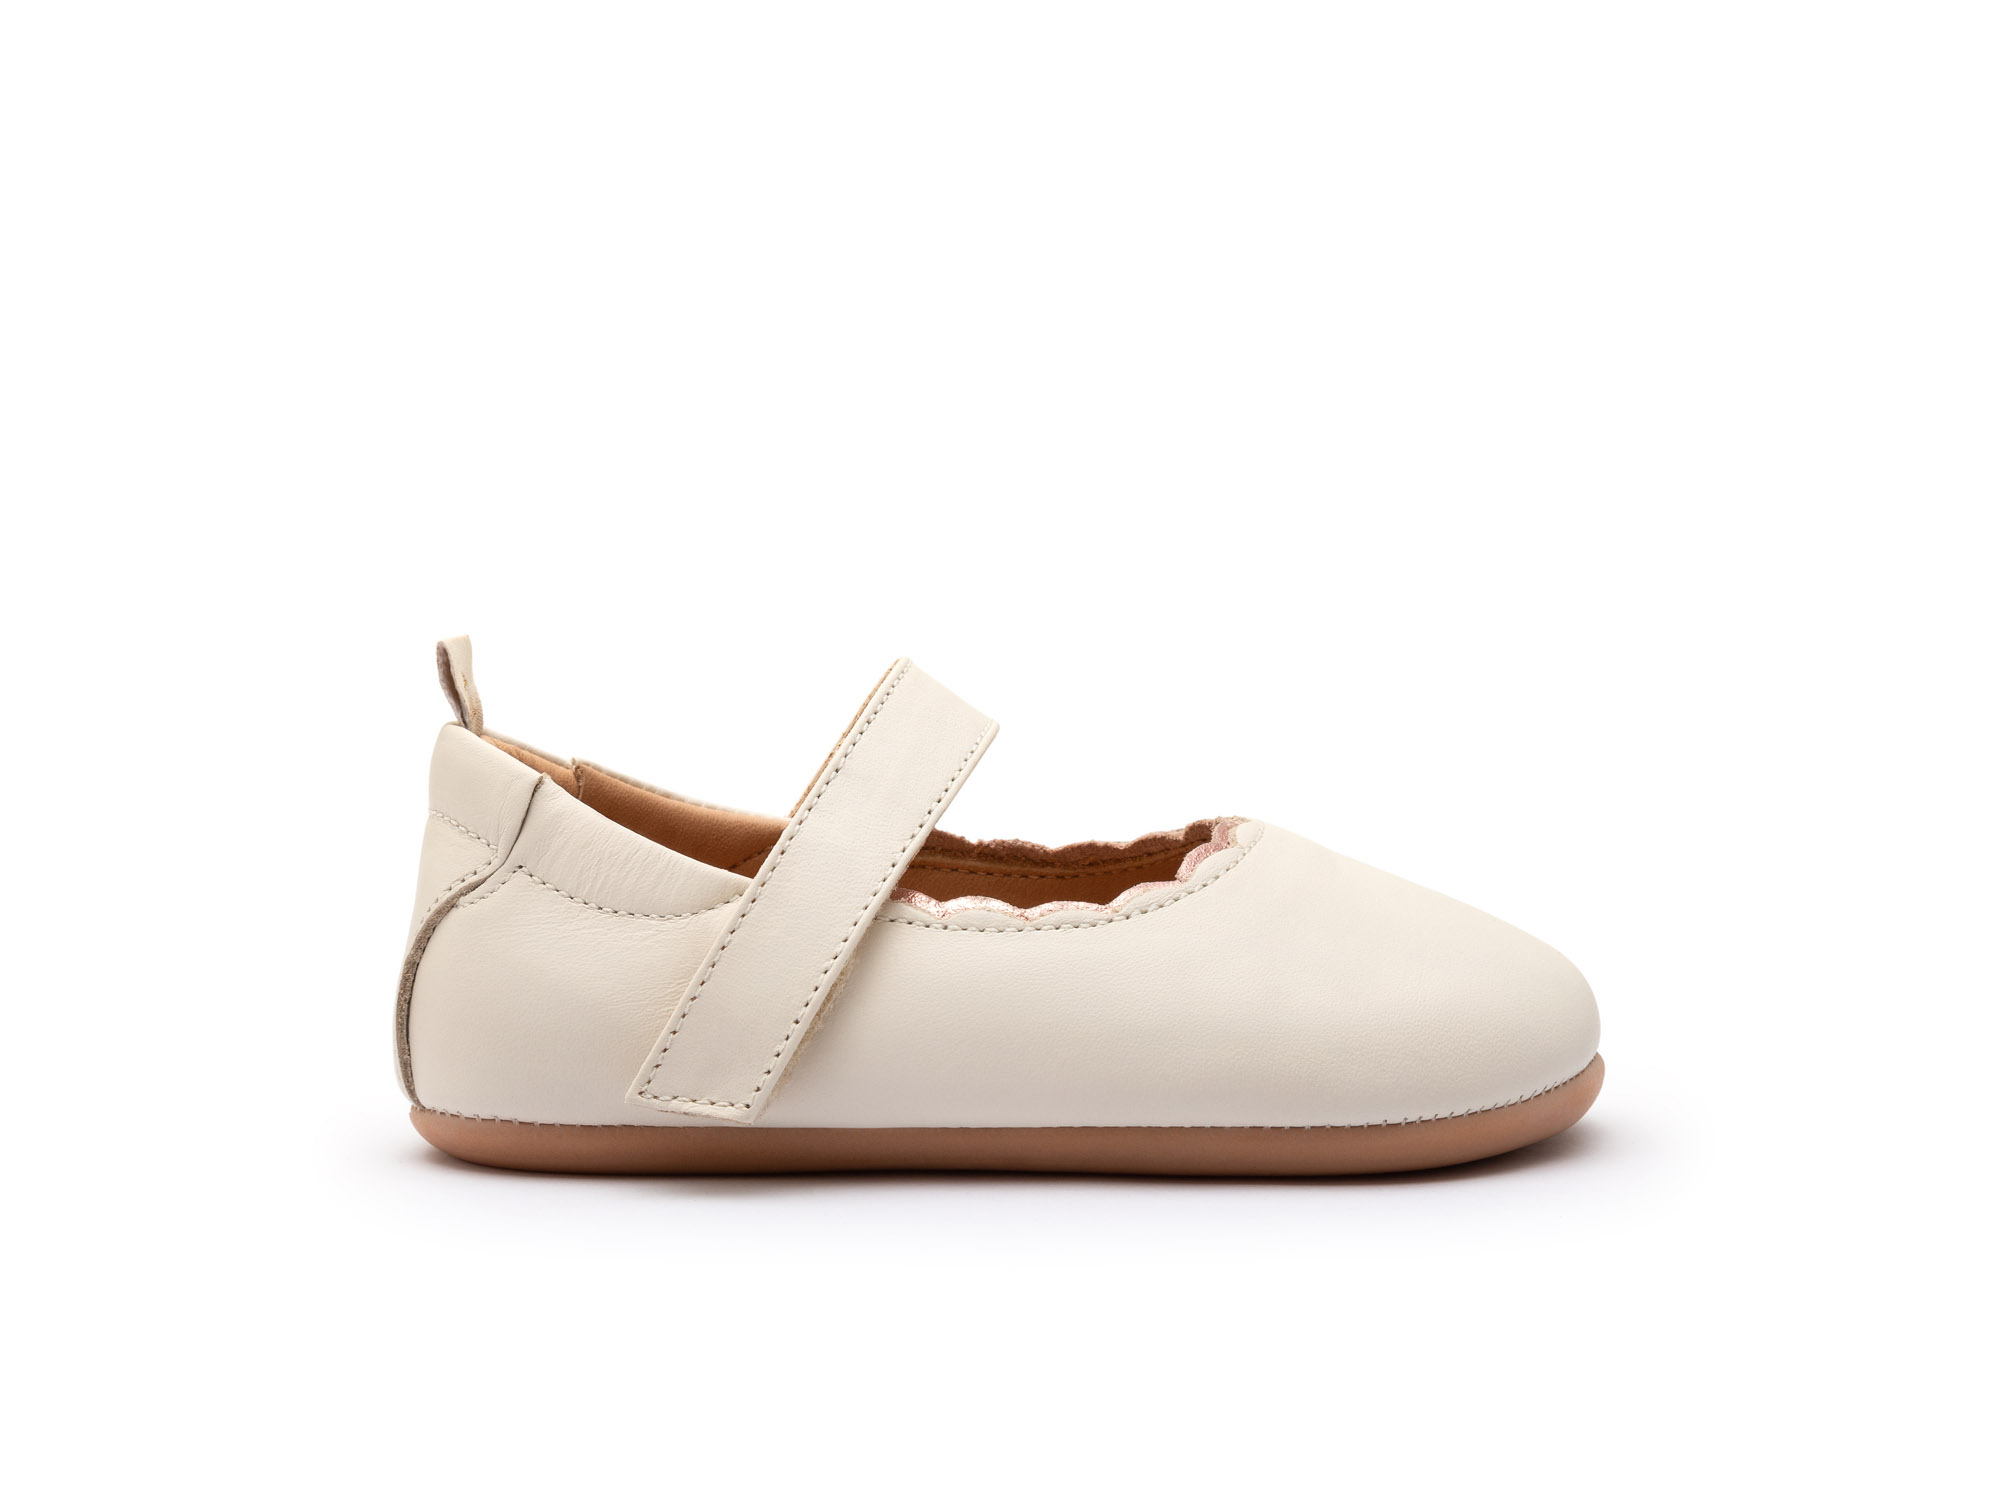 UP & GO Mary Janes for Girls Roundy | Tip Toey Joey - Australia - 4